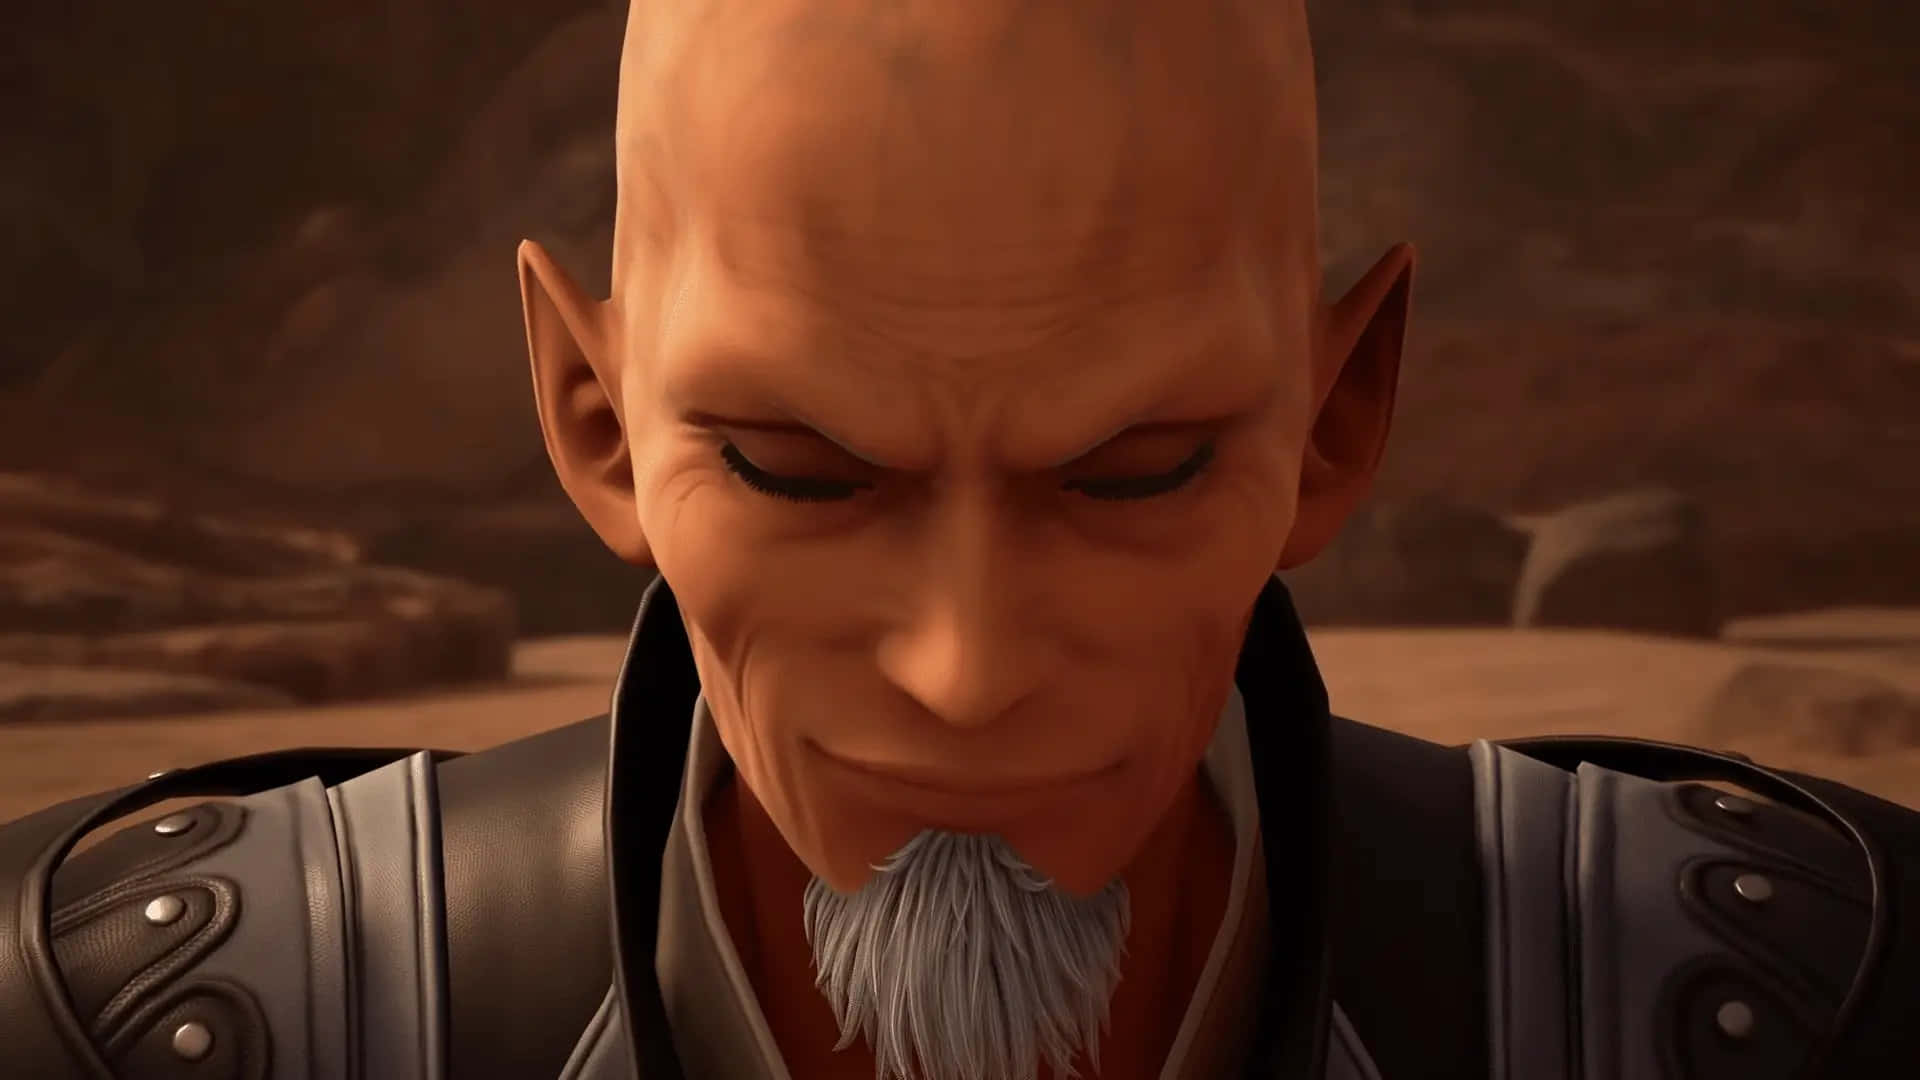 Xehanort takes center stage in this Kingdom Hearts image Wallpaper